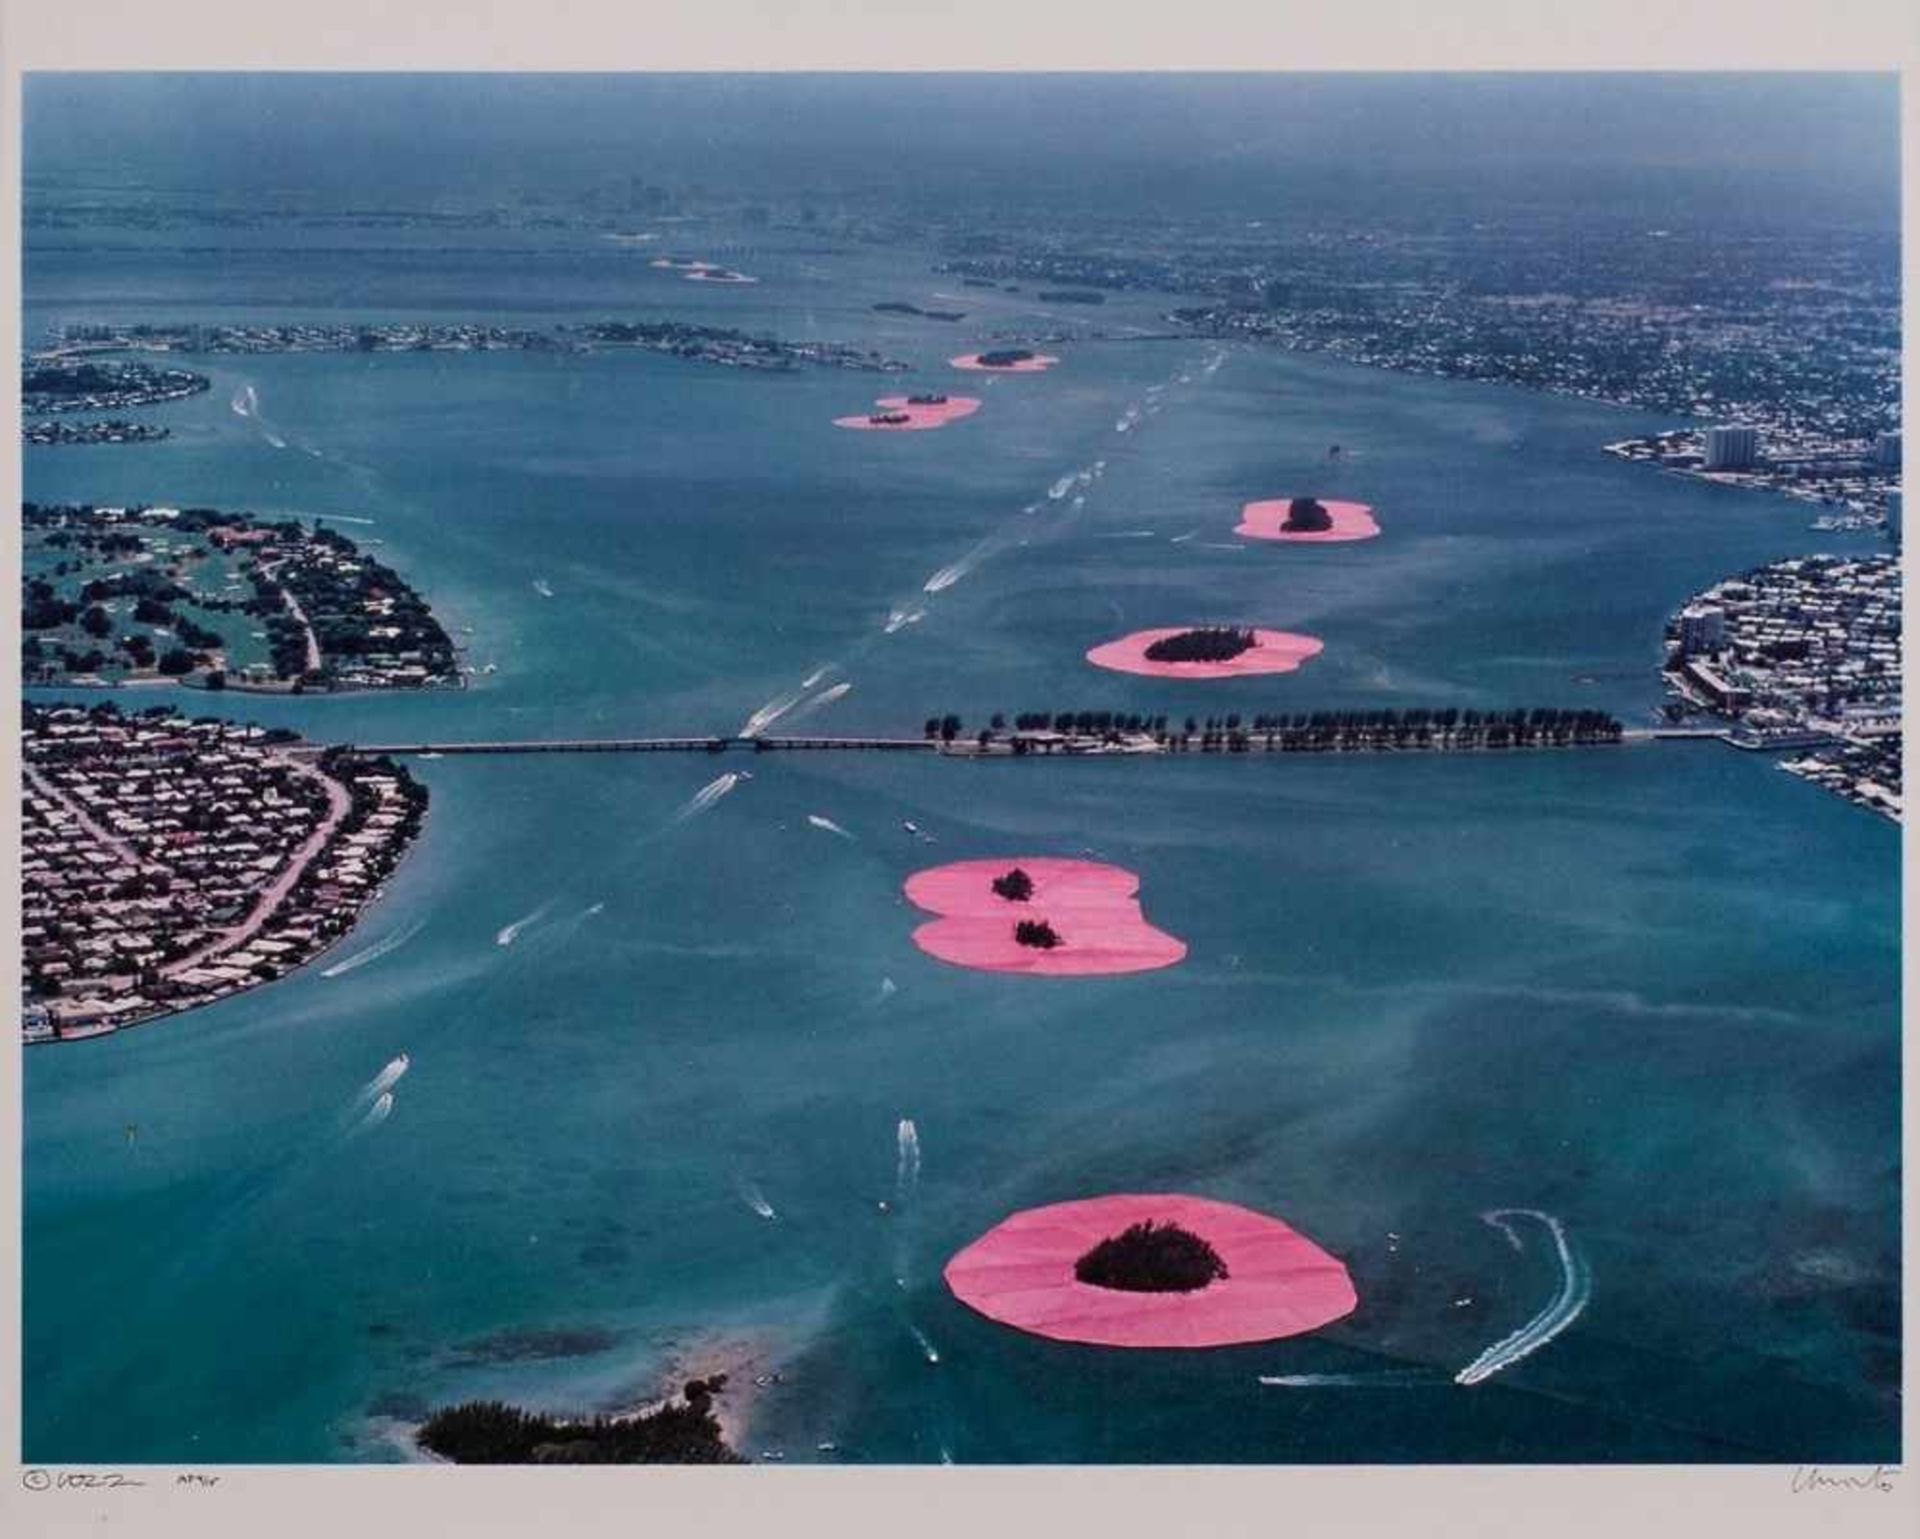 Serie von 4 PhotographienChristo/ Wolfgang Volz "Surrounded Islands, Biscayne Bay, Greater Miami, - Image 2 of 5